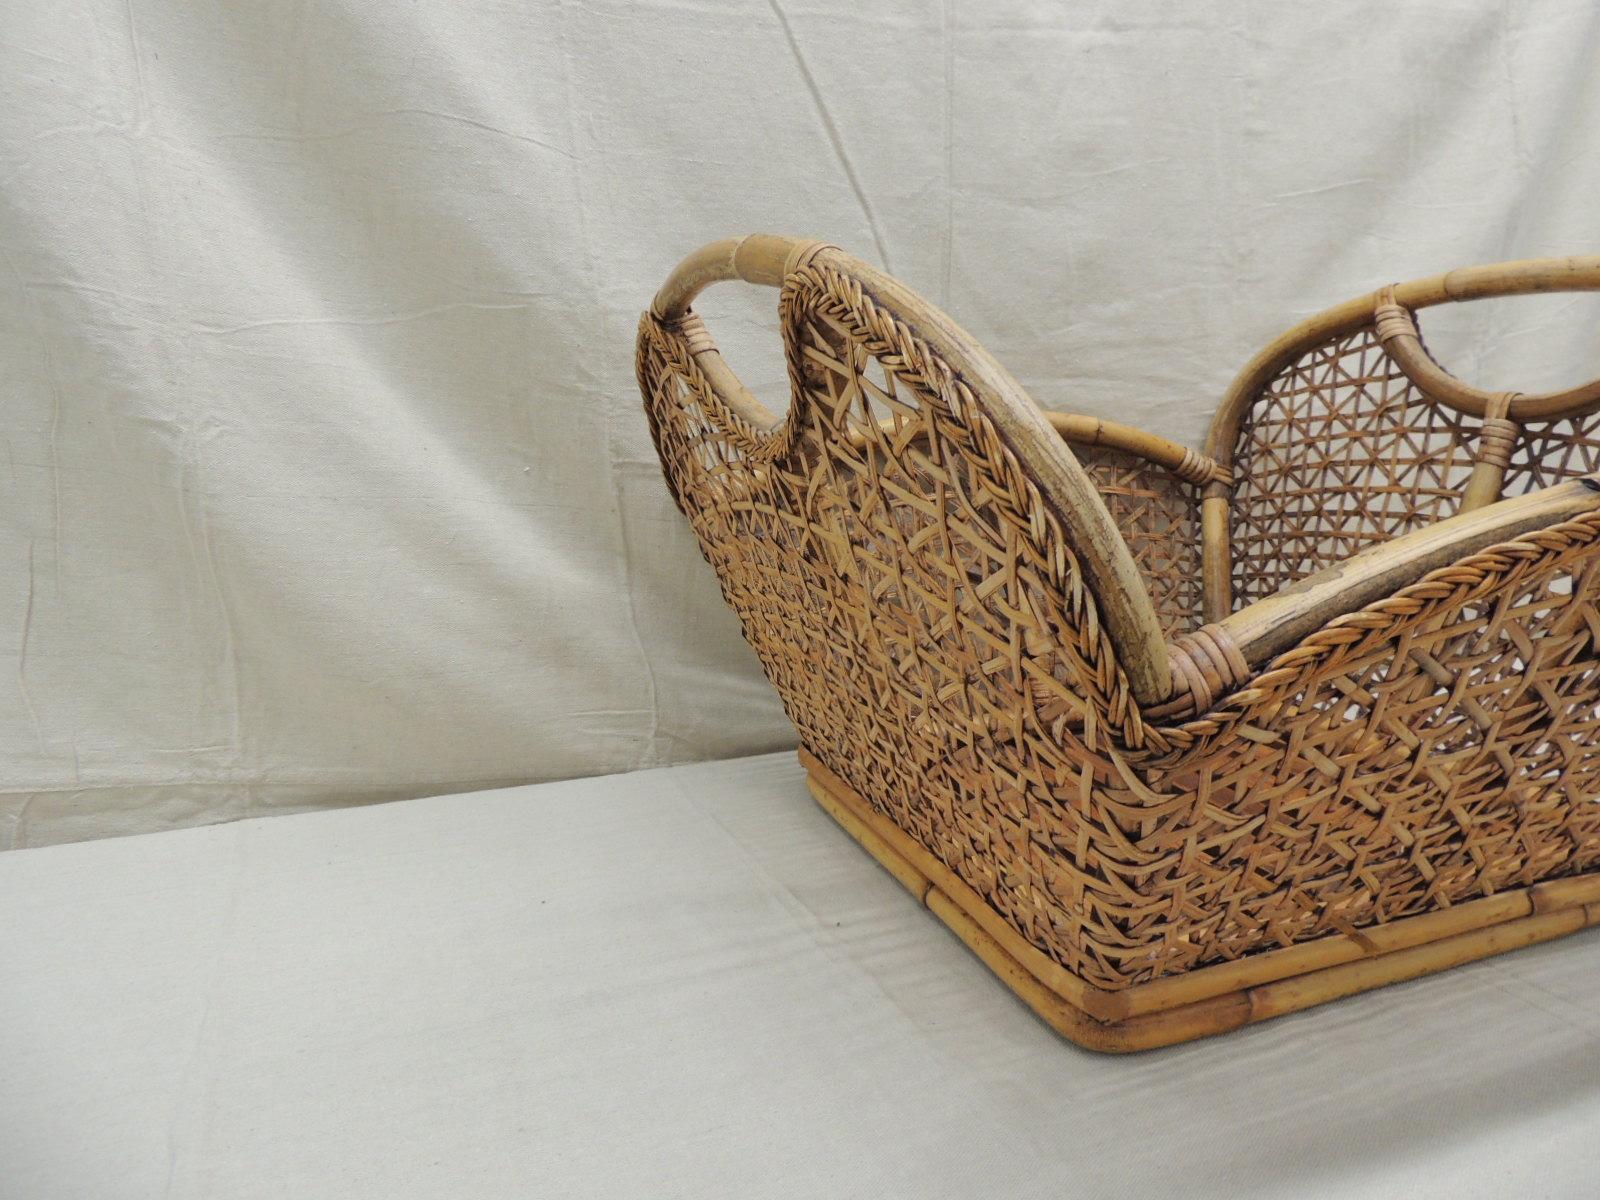 Vintage large laundry bamboo and rattan basket.
(Fits 2 European pillows inside)
Size: 24.5